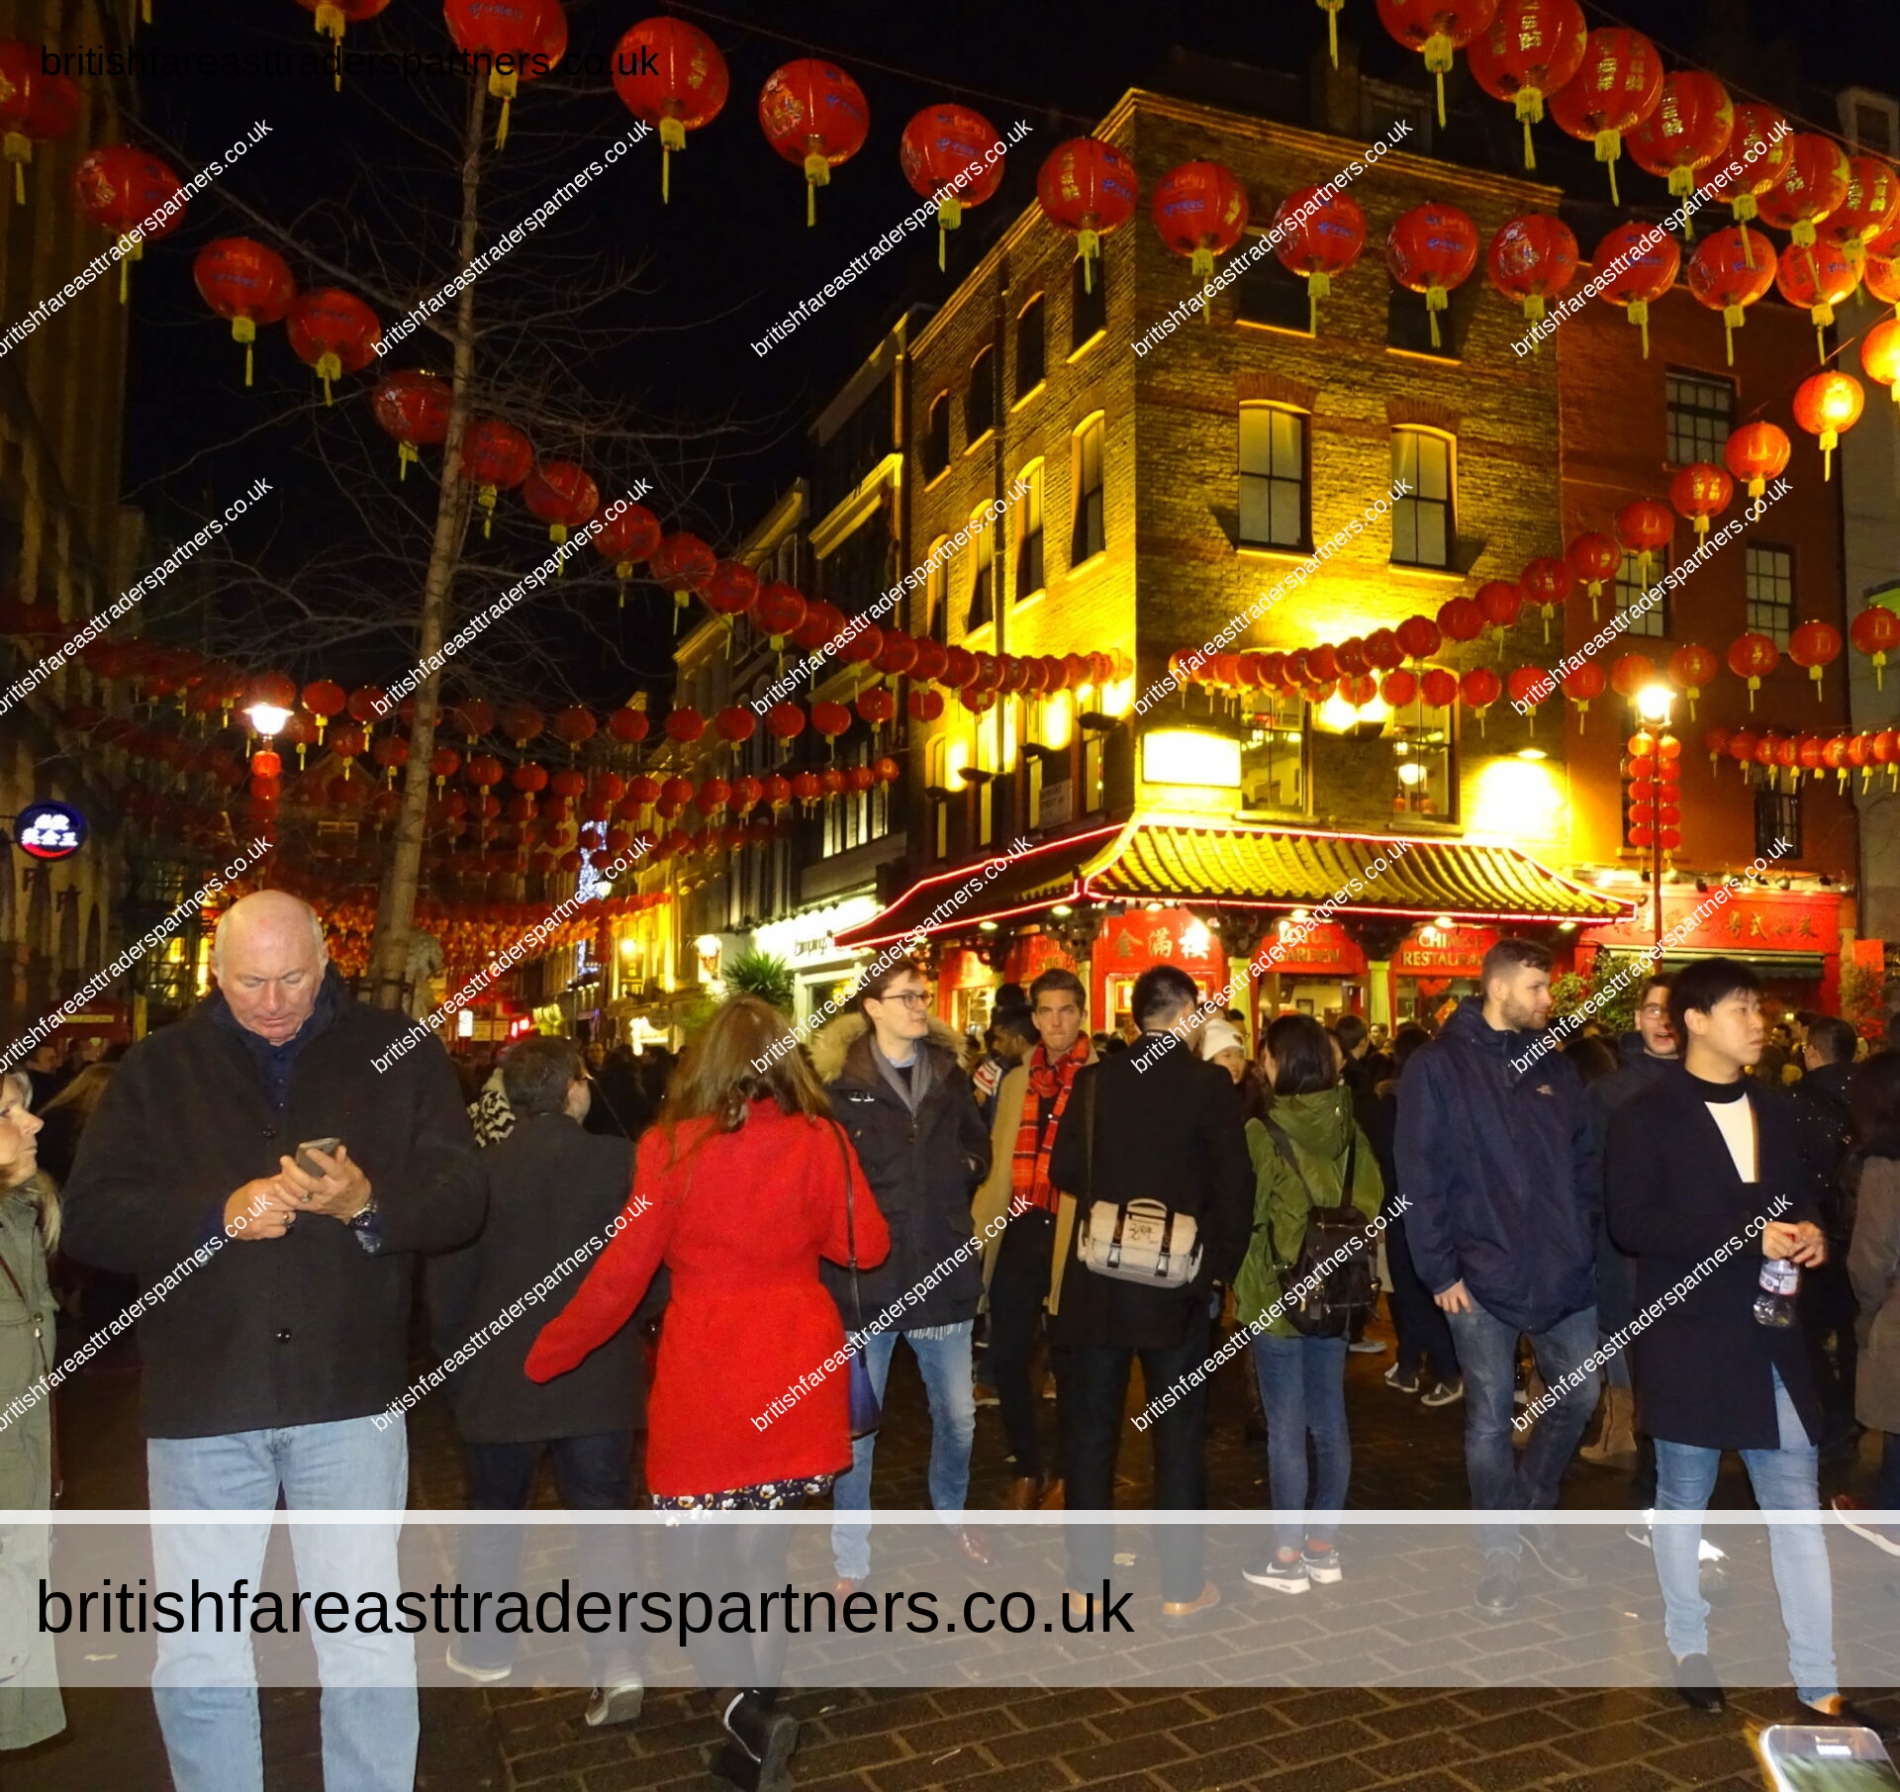 Chinese New Year Celebrations in London Chinatown, United Kingdom